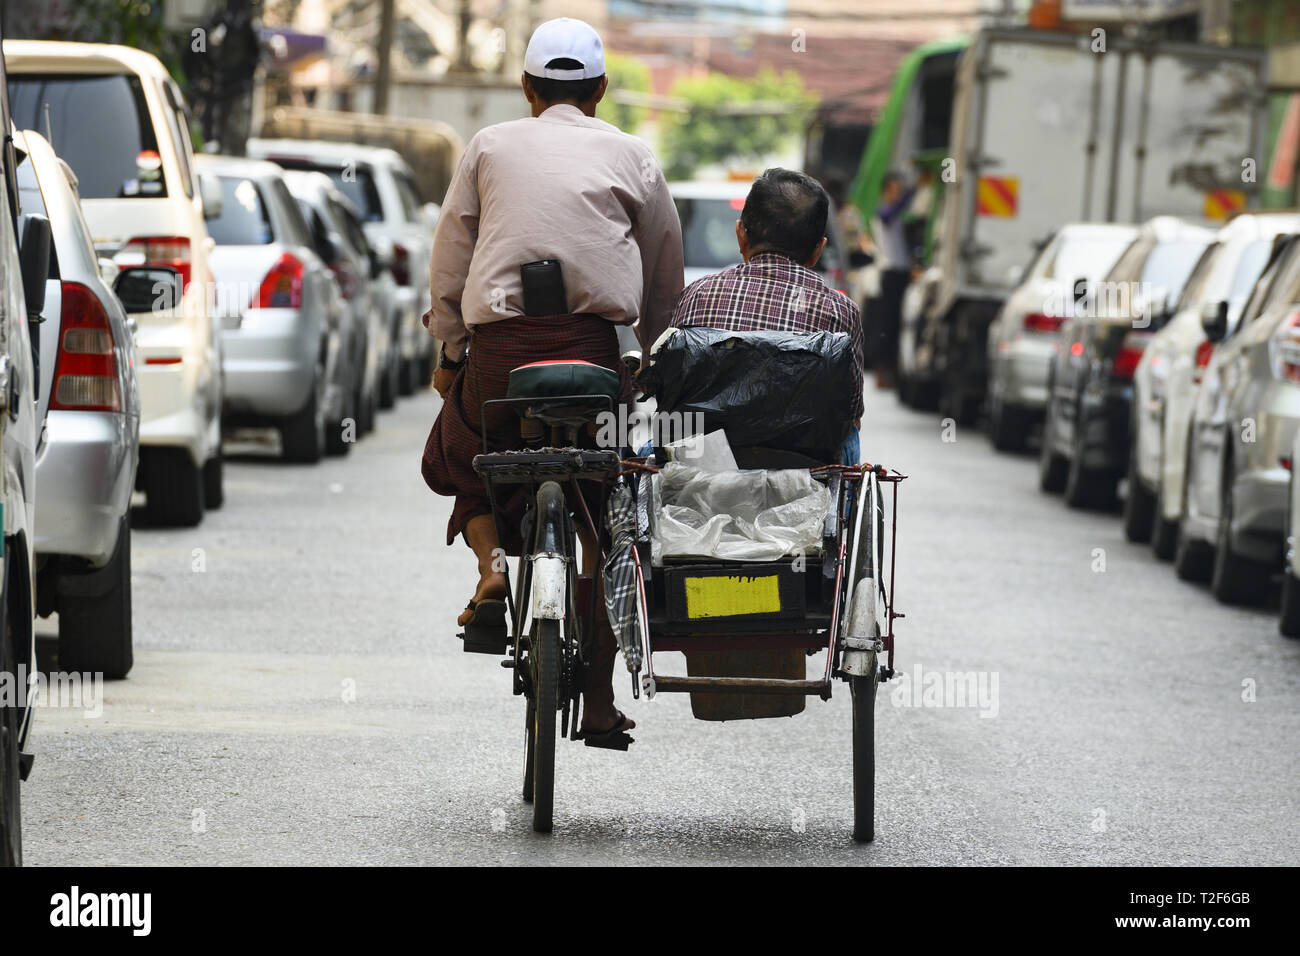 A unidentified Sai Kaa driver is carrying a passenger on his side car among the narrow streets of Yangon, Myanmar. Stock Photo